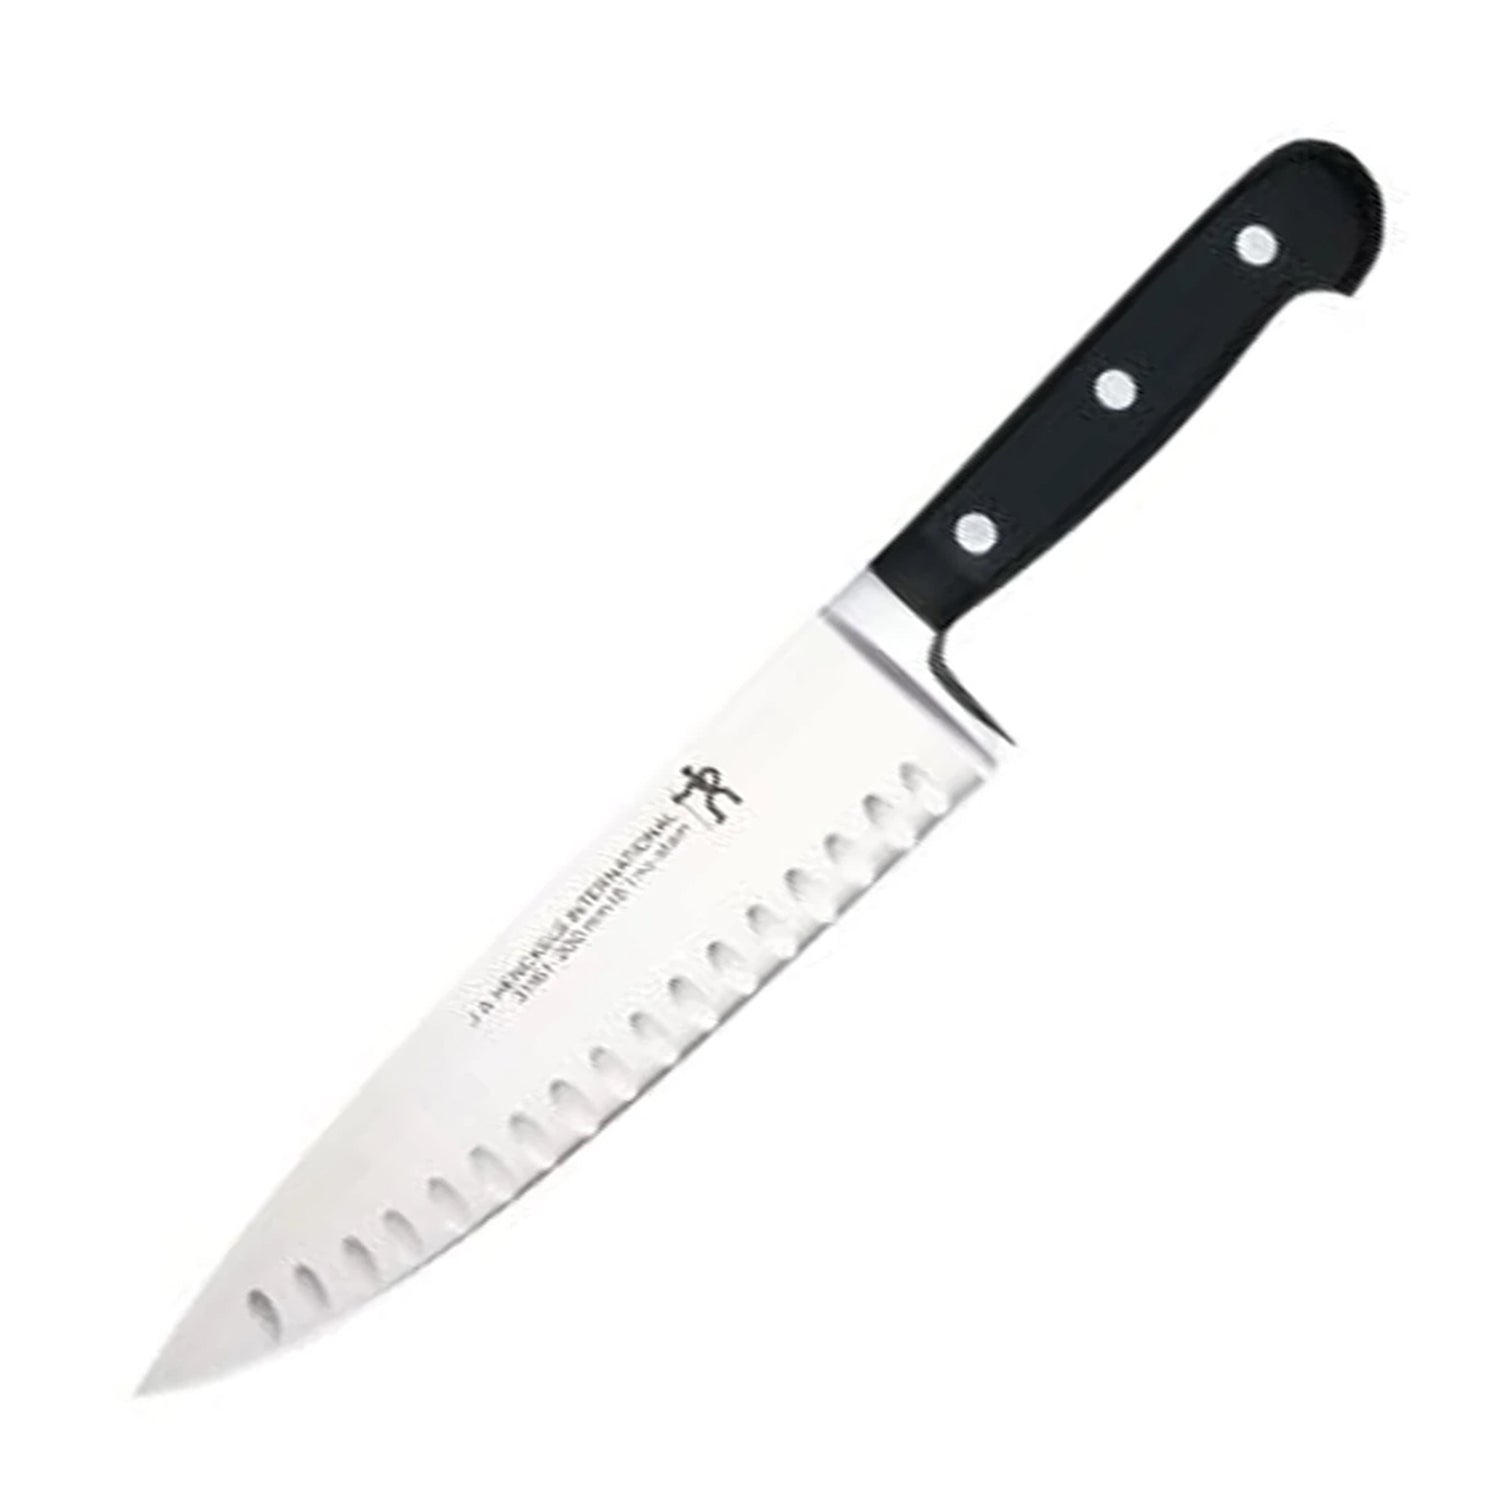 Shun Classic 8-Inch Chef's Knife with Scallops